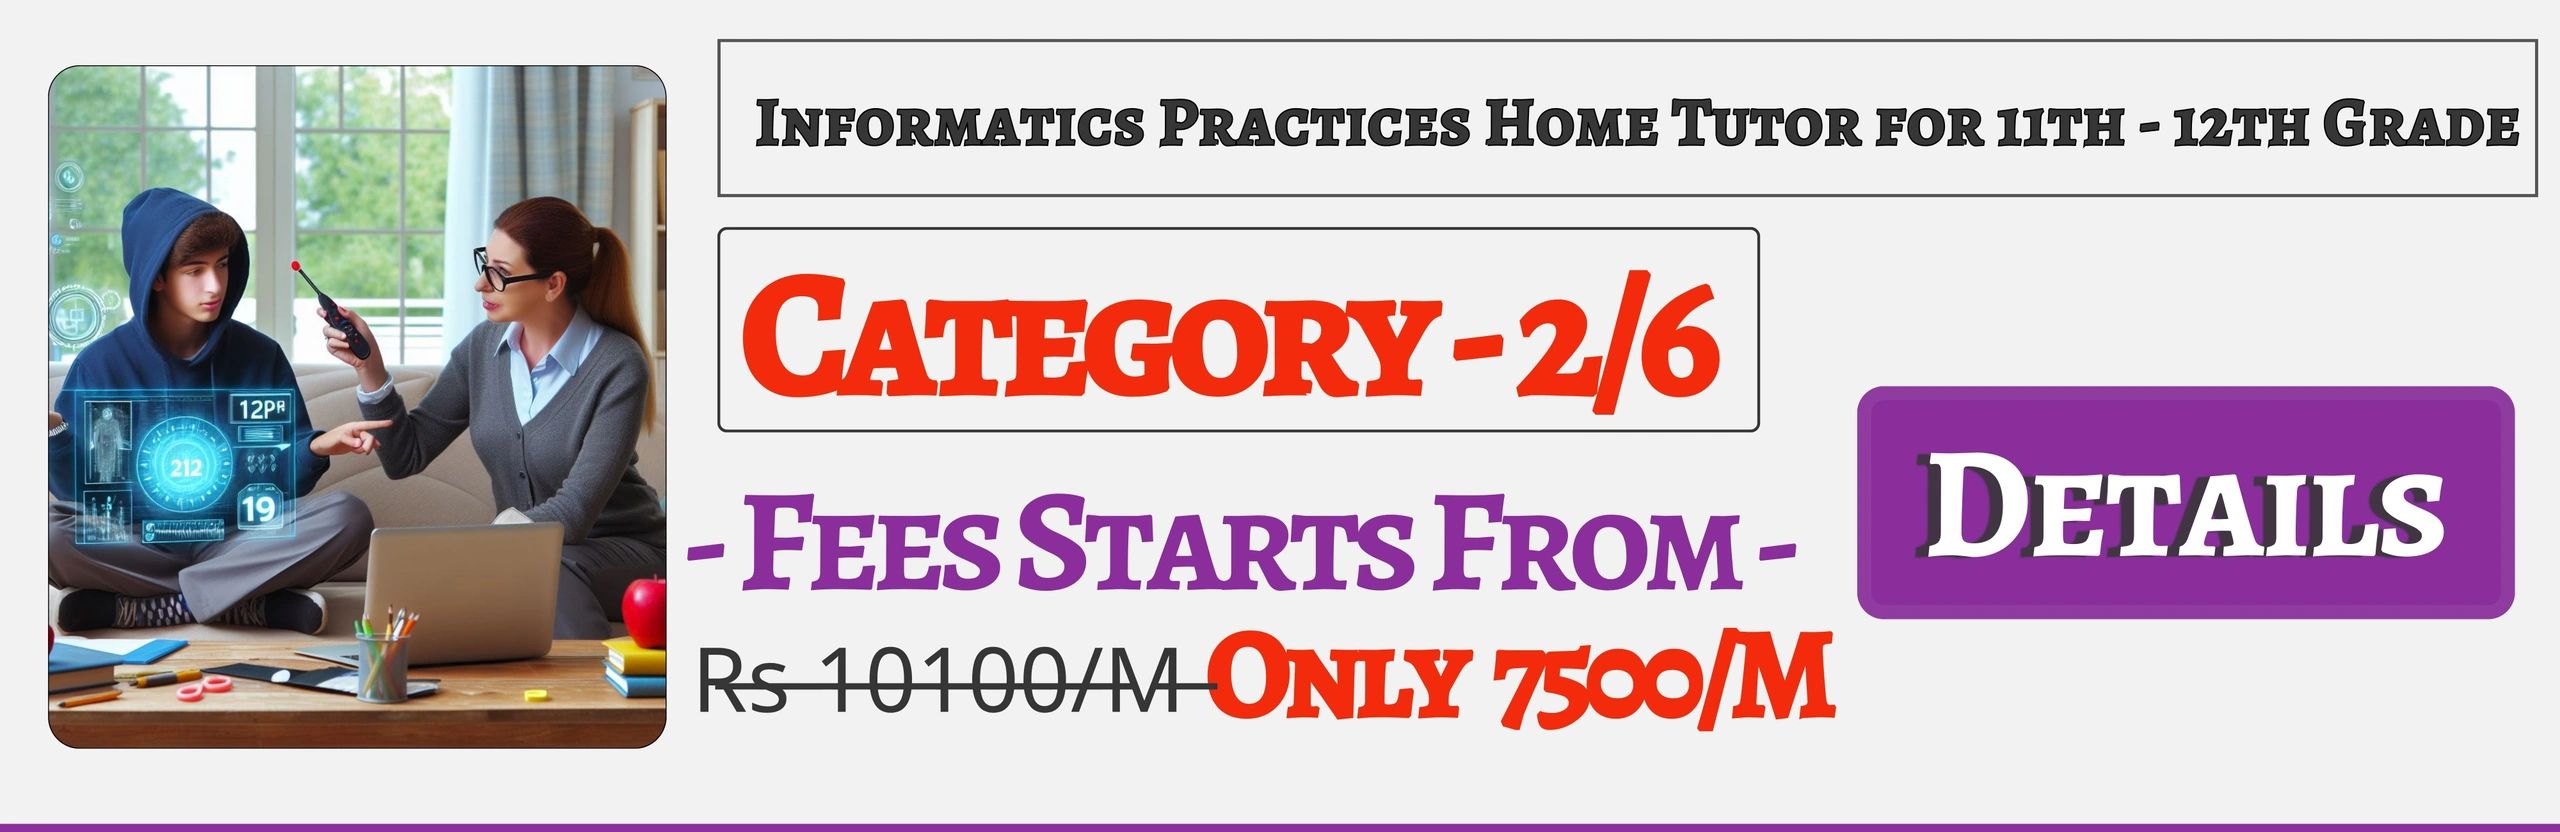 Book Best Nearby Informatics Practices Home Tuition Tutors For 11th & 12th Jaipur ,Fees Only 7500/M